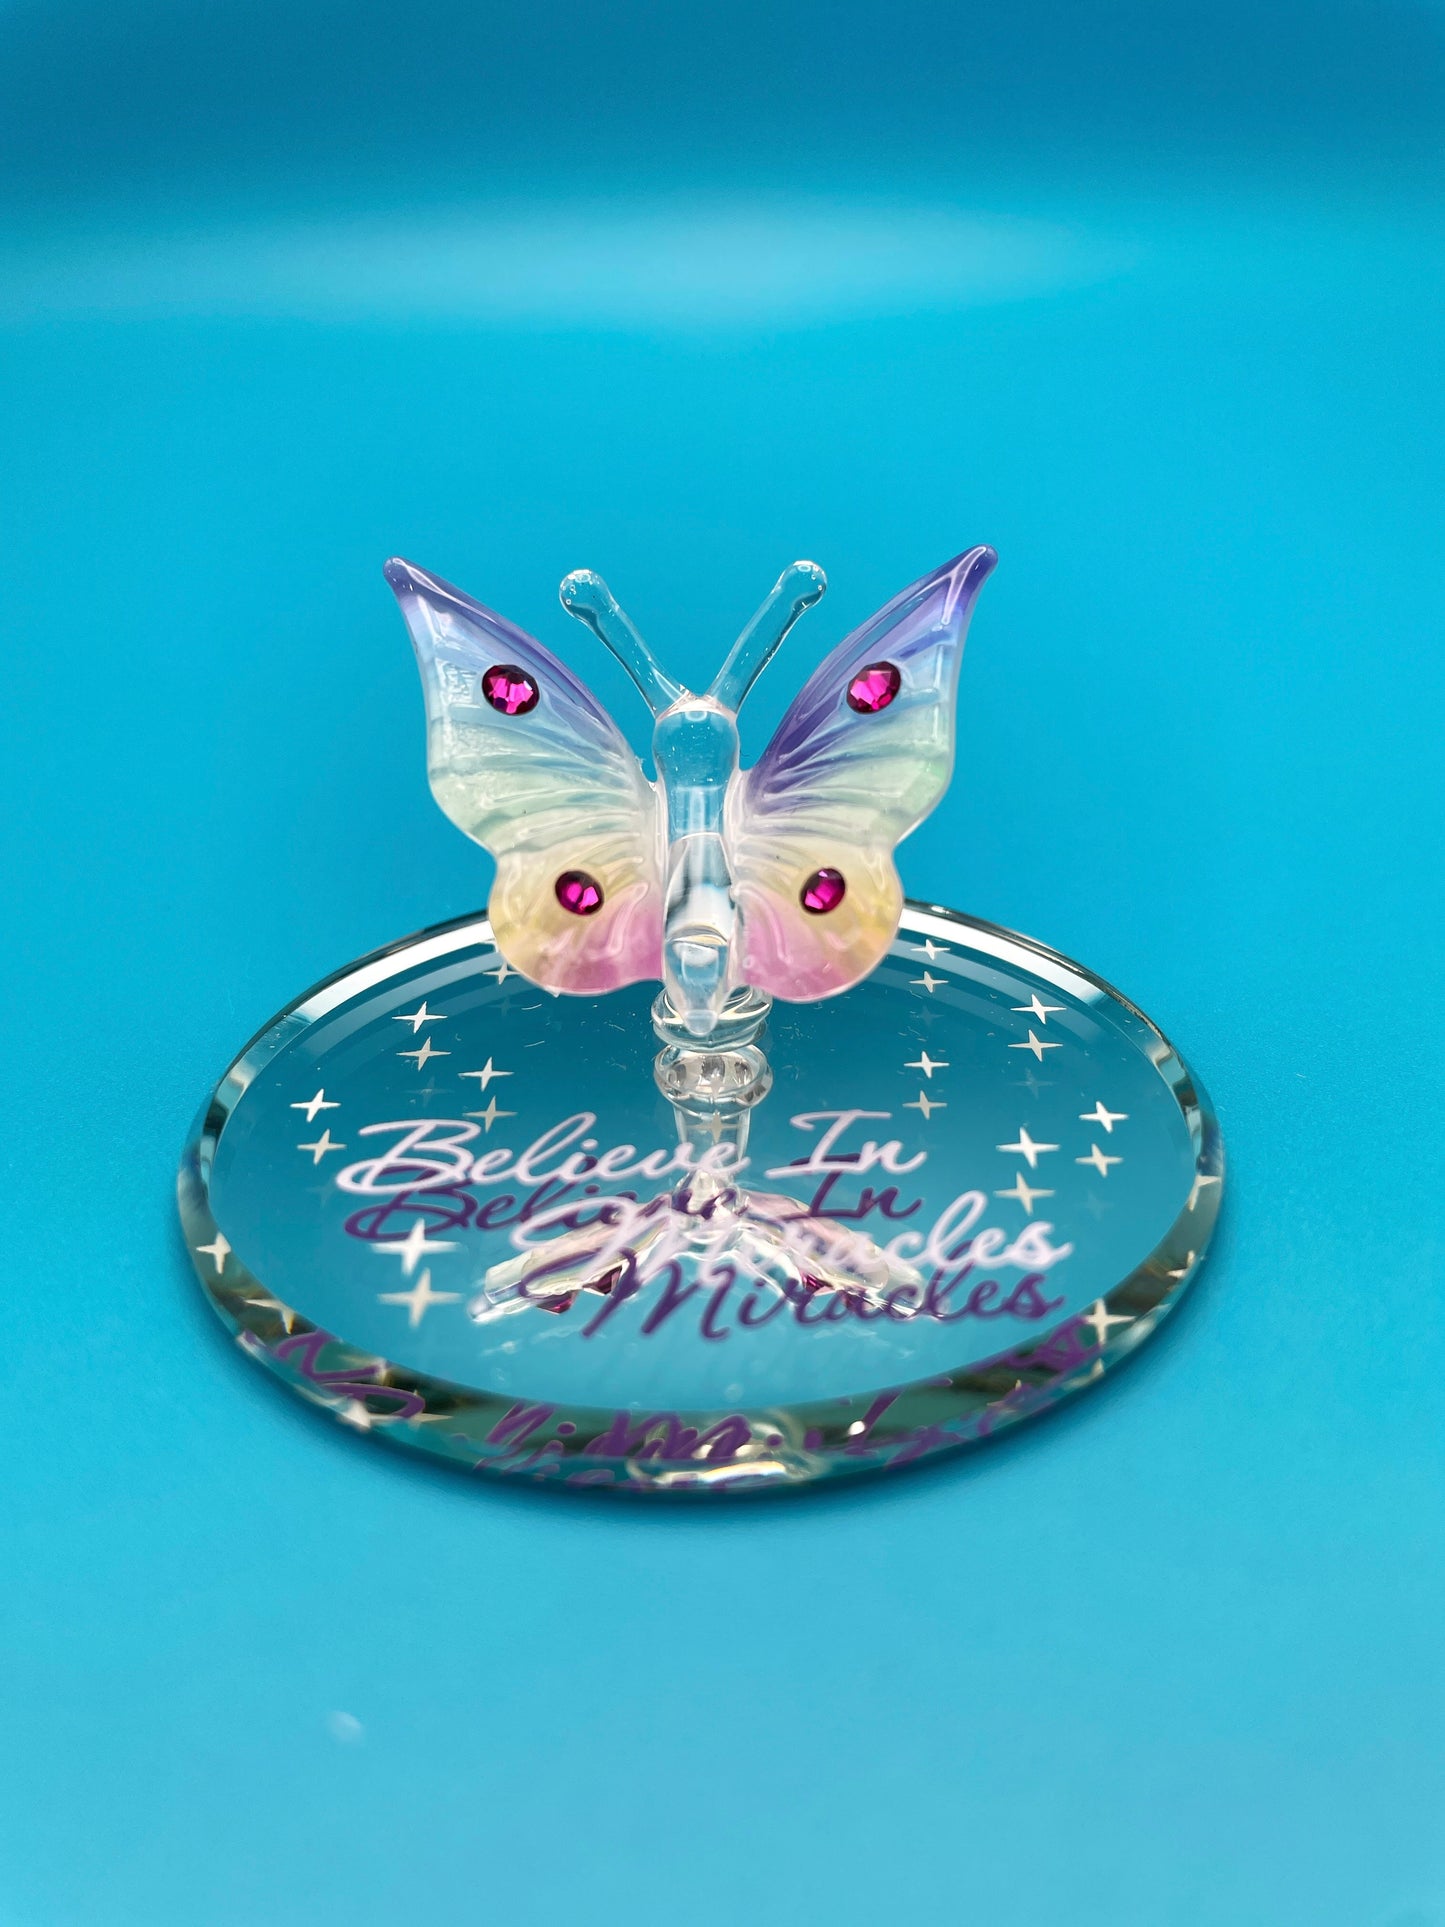 Believe in Miracles Butterfly